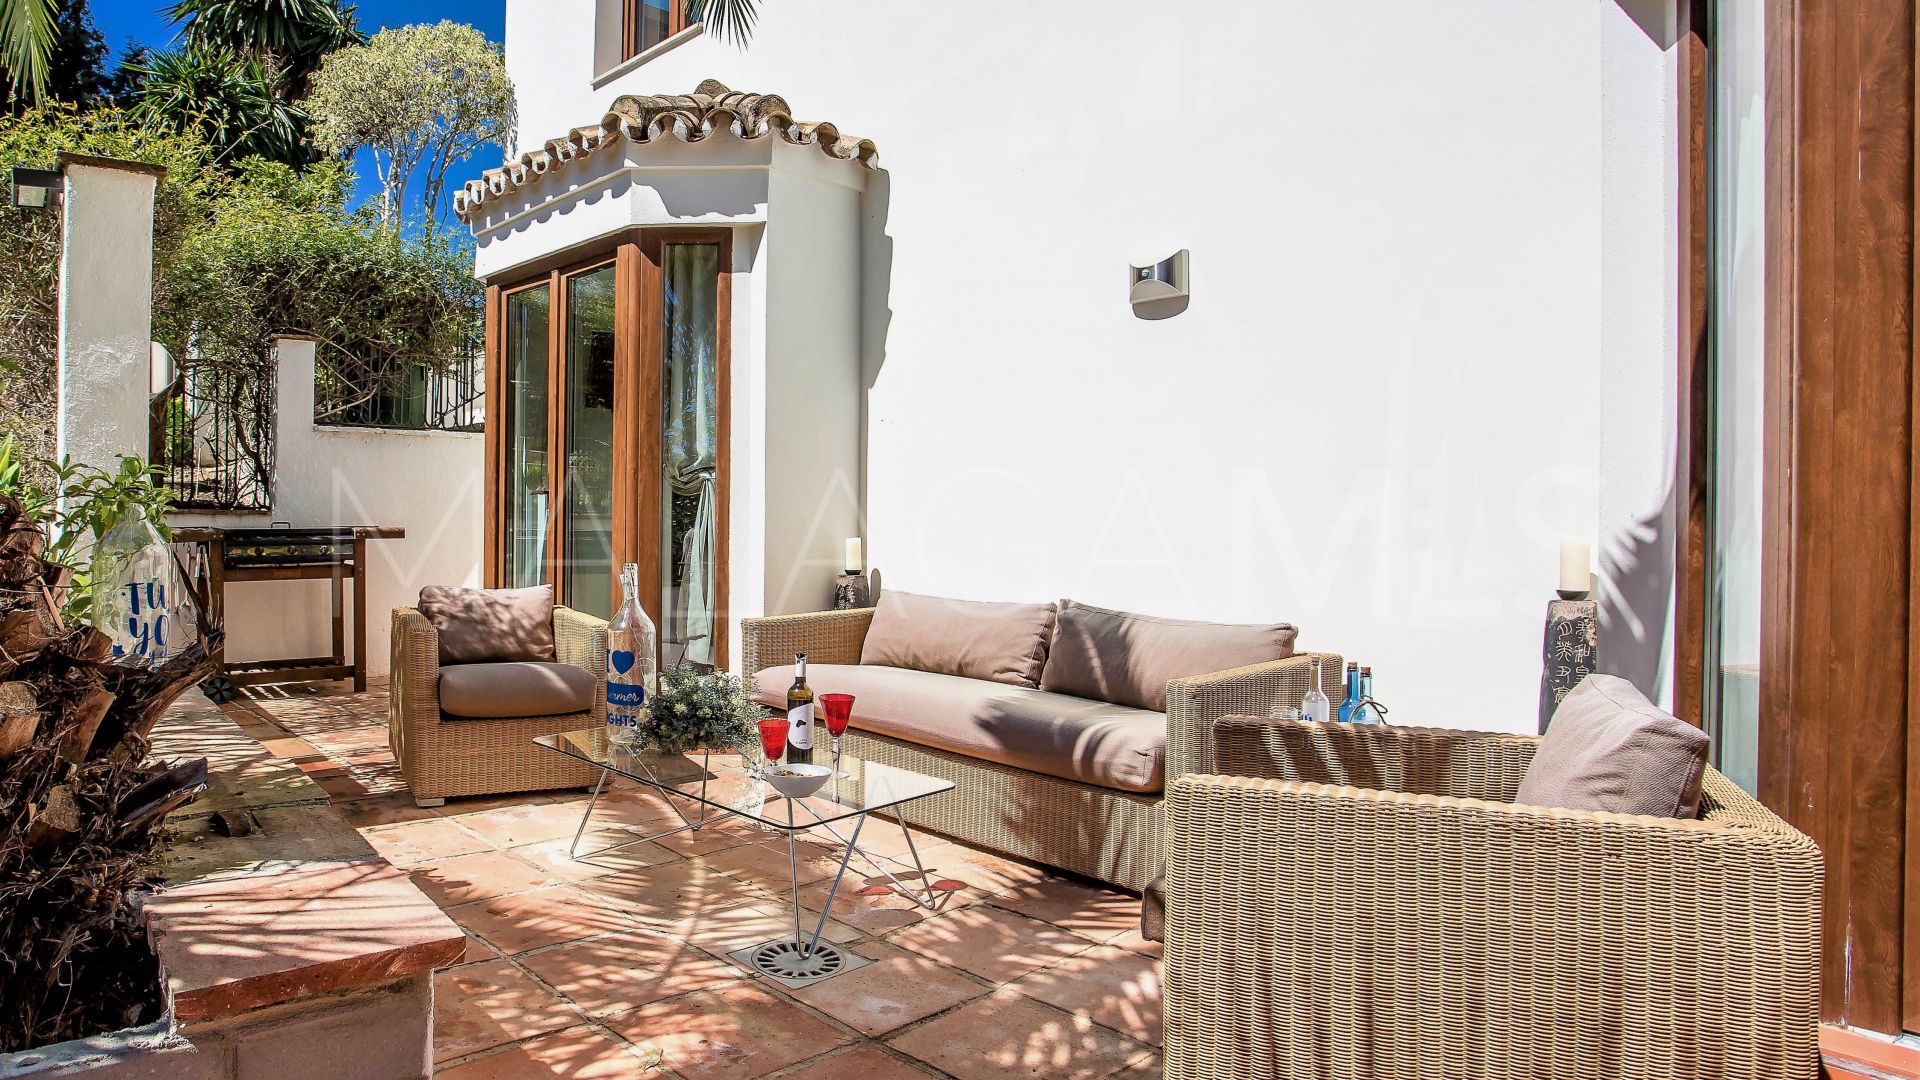 For sale villa in San Pedro Playa with 8 bedrooms